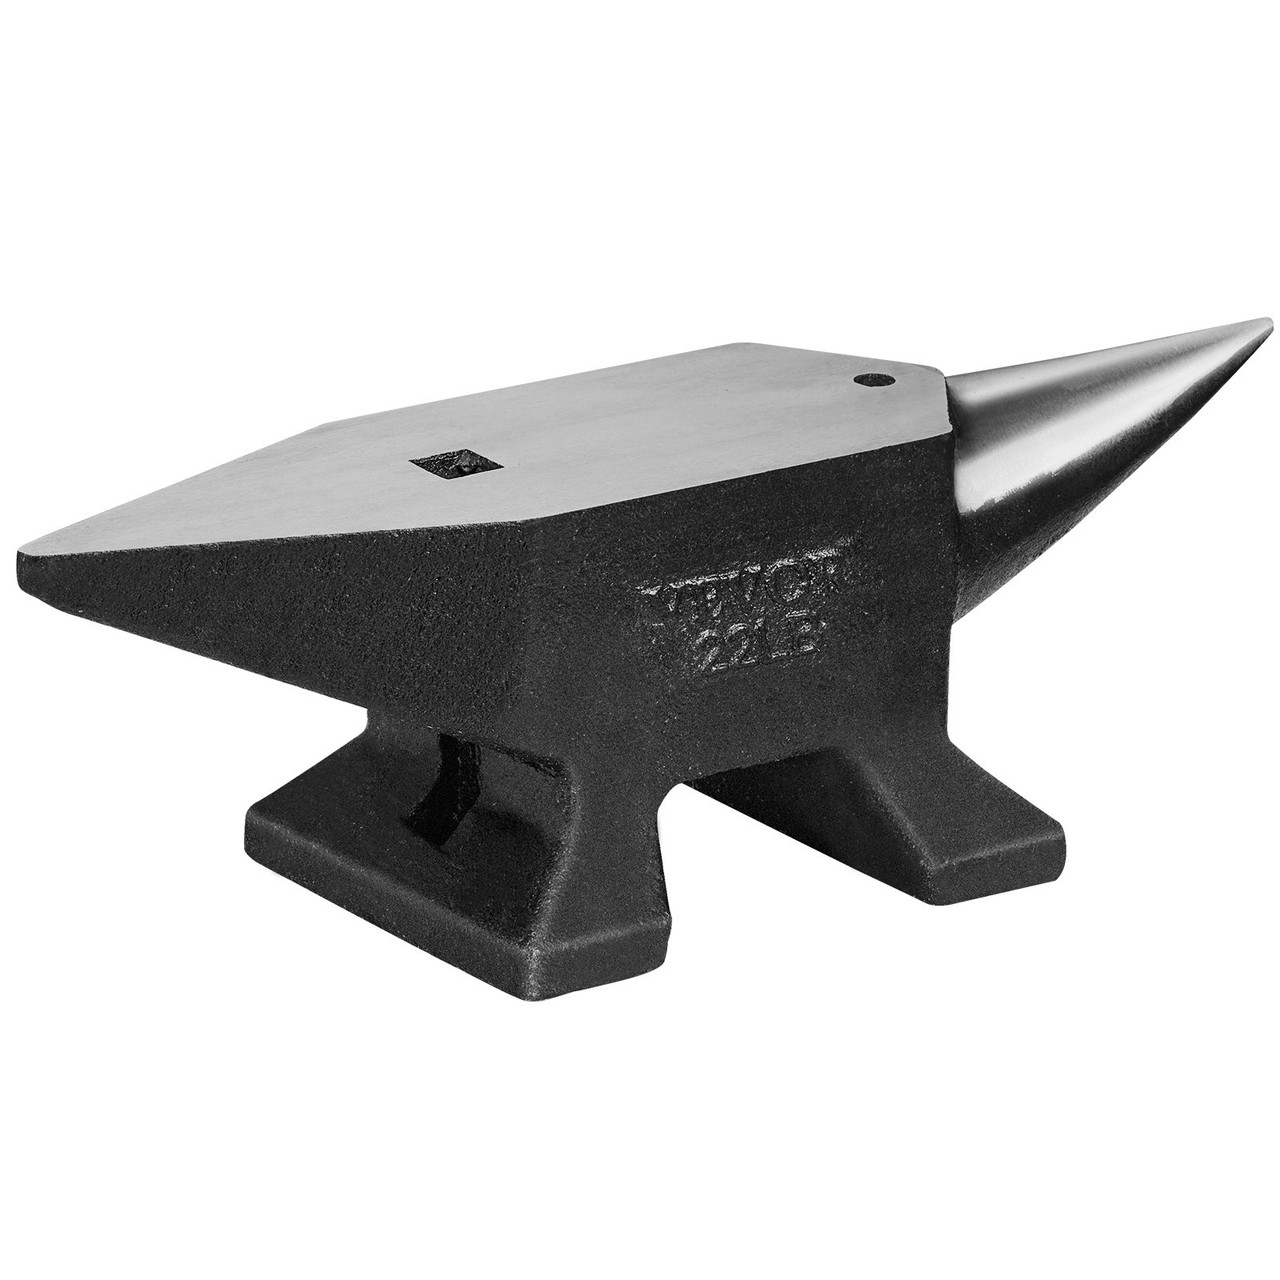 VEVOR Single Horn Anvil, 22Lbs Cast Steel Anvil, High Hardness Rugged Round Horn Anvil Blacksmith, Large Countertop and Stable Base, with Round and Square Hole, Metalsmith Tool for Bending and Shaping